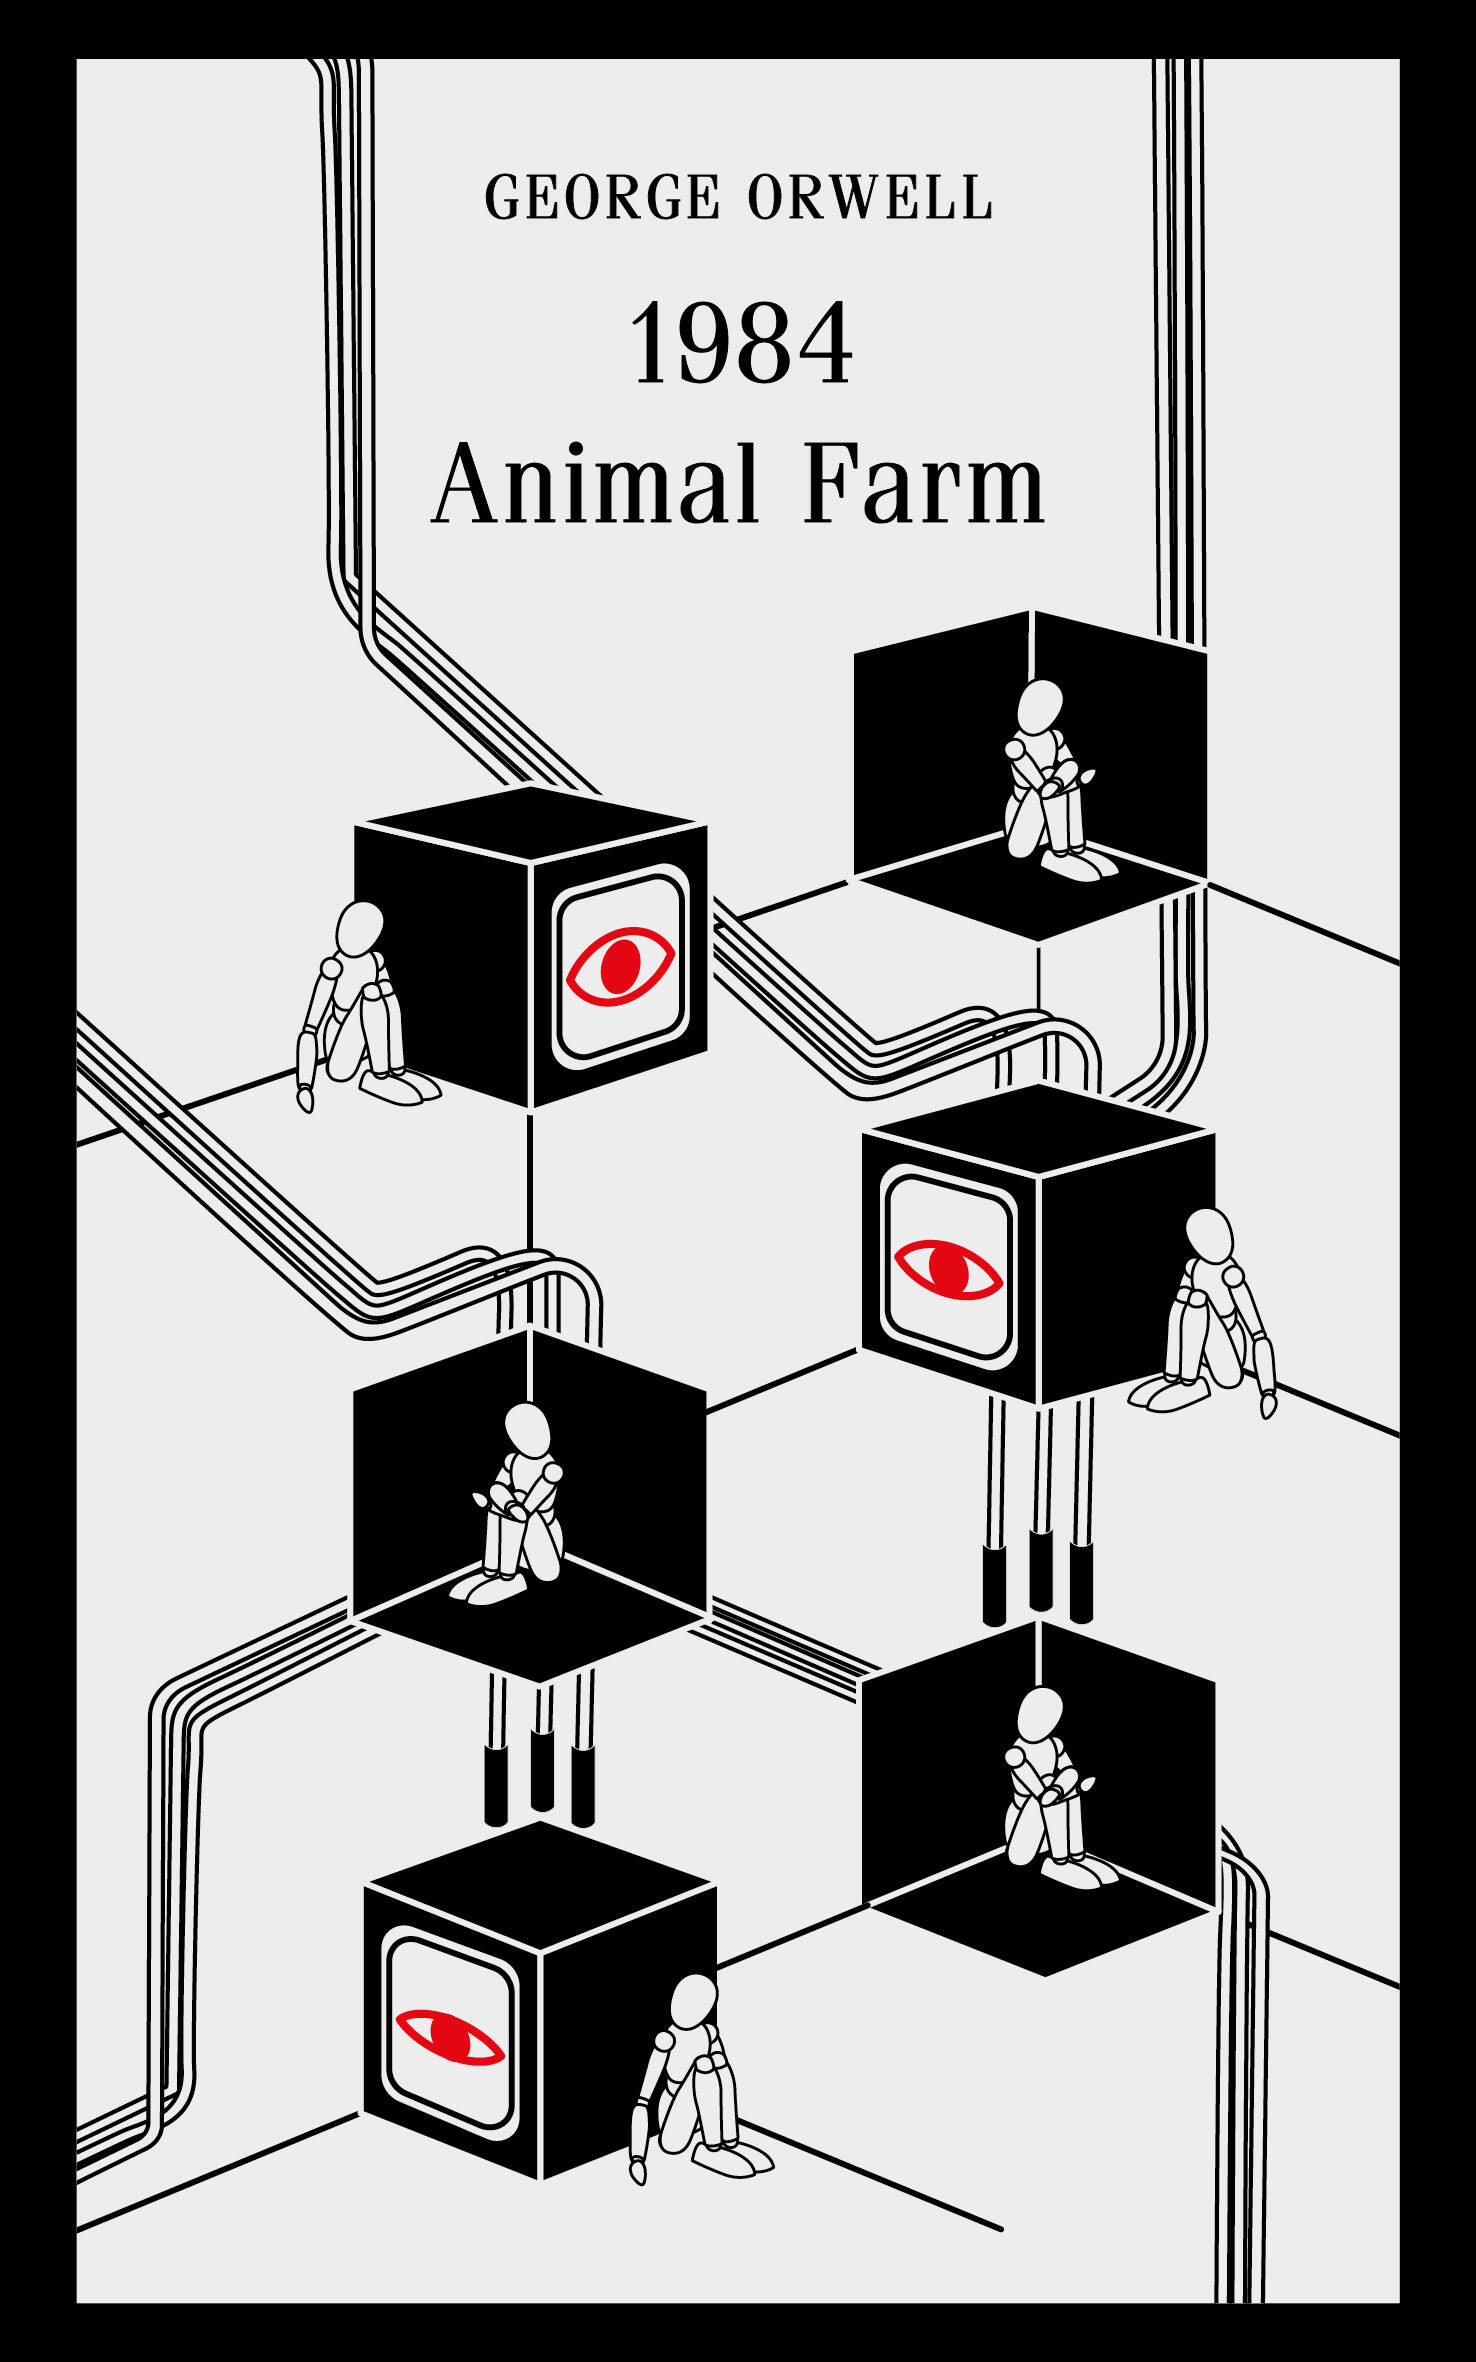 christian brian the most human human what artificial intelligence teaches us about being alive Оруэлл Джордж 1984. Animal Farm